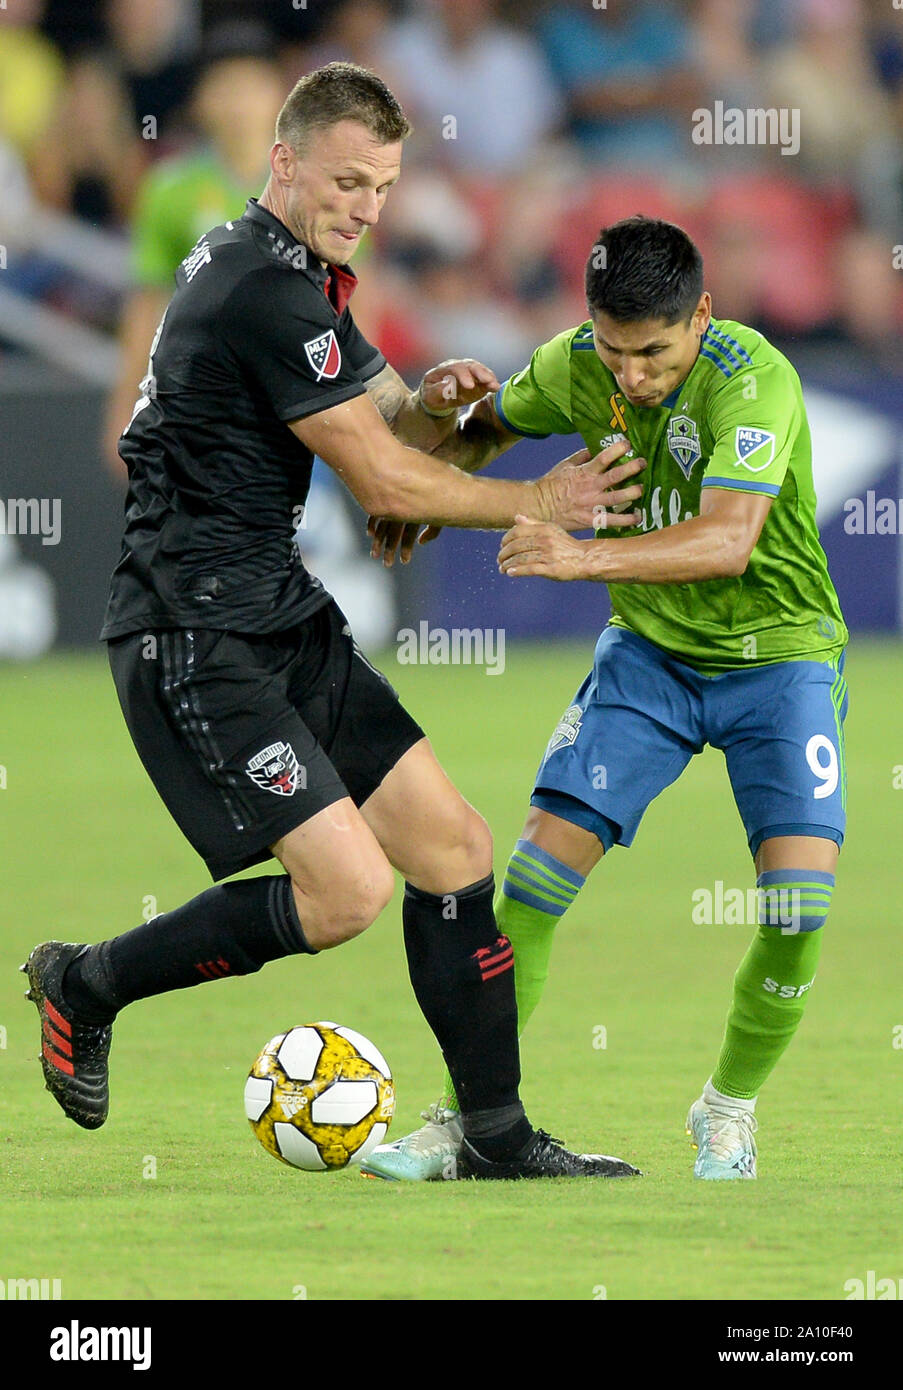 Washington, DC, USA. 22nd Sep, 2019. 20190922 - D.C. United midfielder FREDERIC BRILLANT (13), left, ties up Seattle Sounders forward RAUL RUIDIAZ (9) in the second half at Audi Field in Washington. Credit: Chuck Myers/ZUMA Wire/Alamy Live News Stock Photo